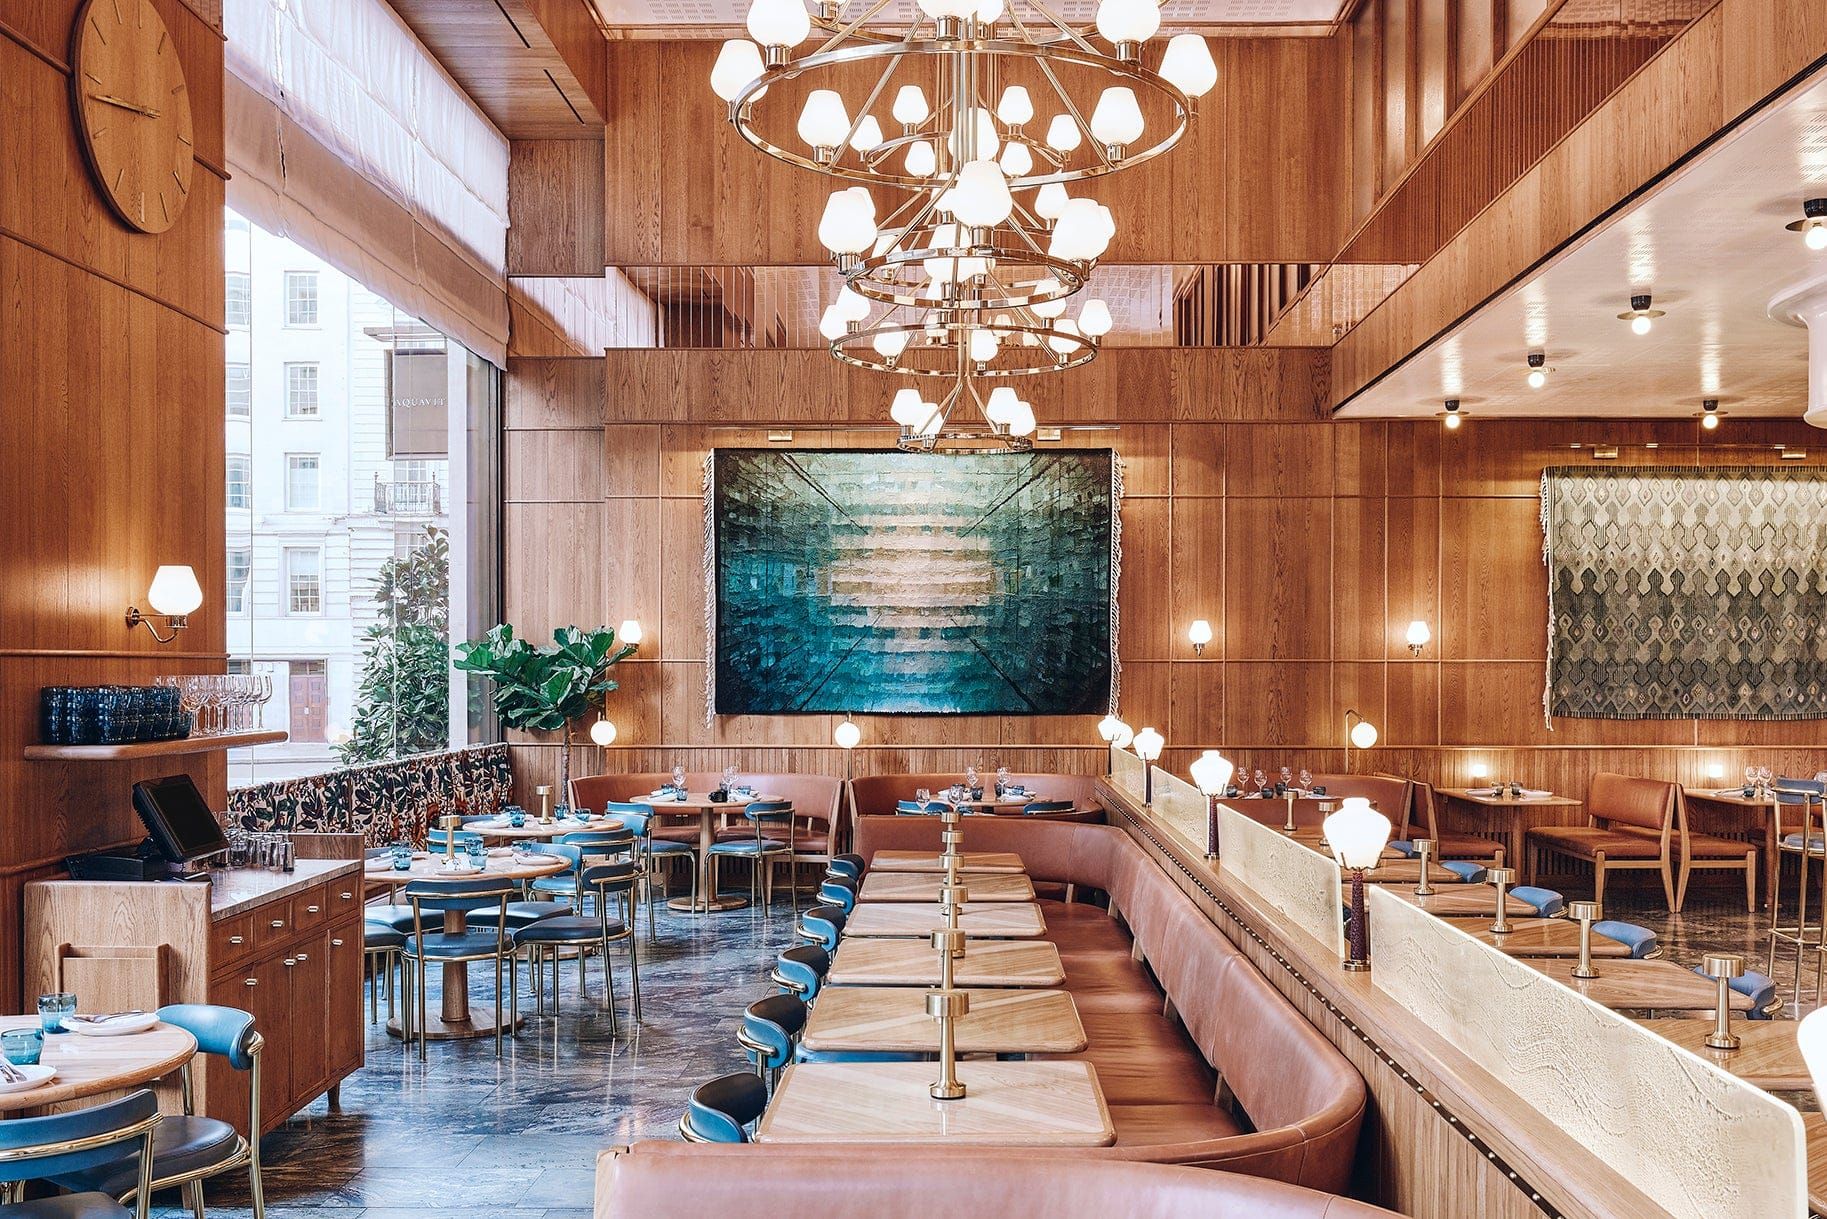 10 Restaurants That Offer a Feast for the Eyes